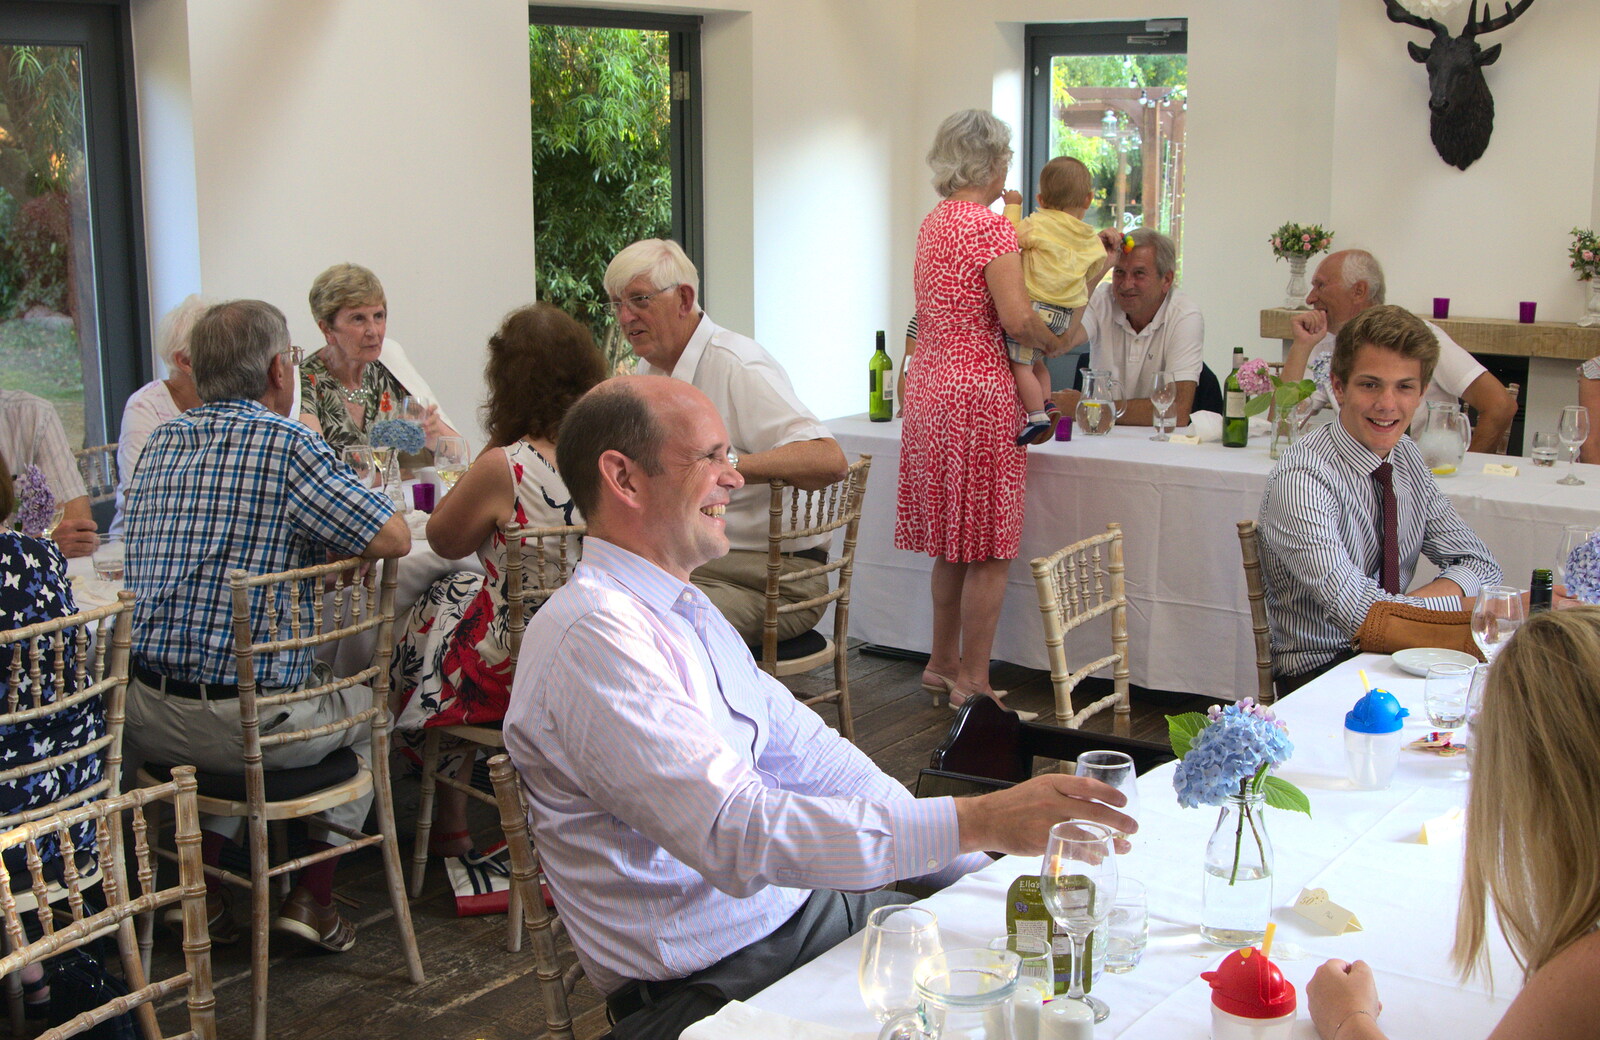 Phil from Bob and Bernice's 50th Wedding Anniversary, Hinton Admiral, Dorset - 25th July 2014